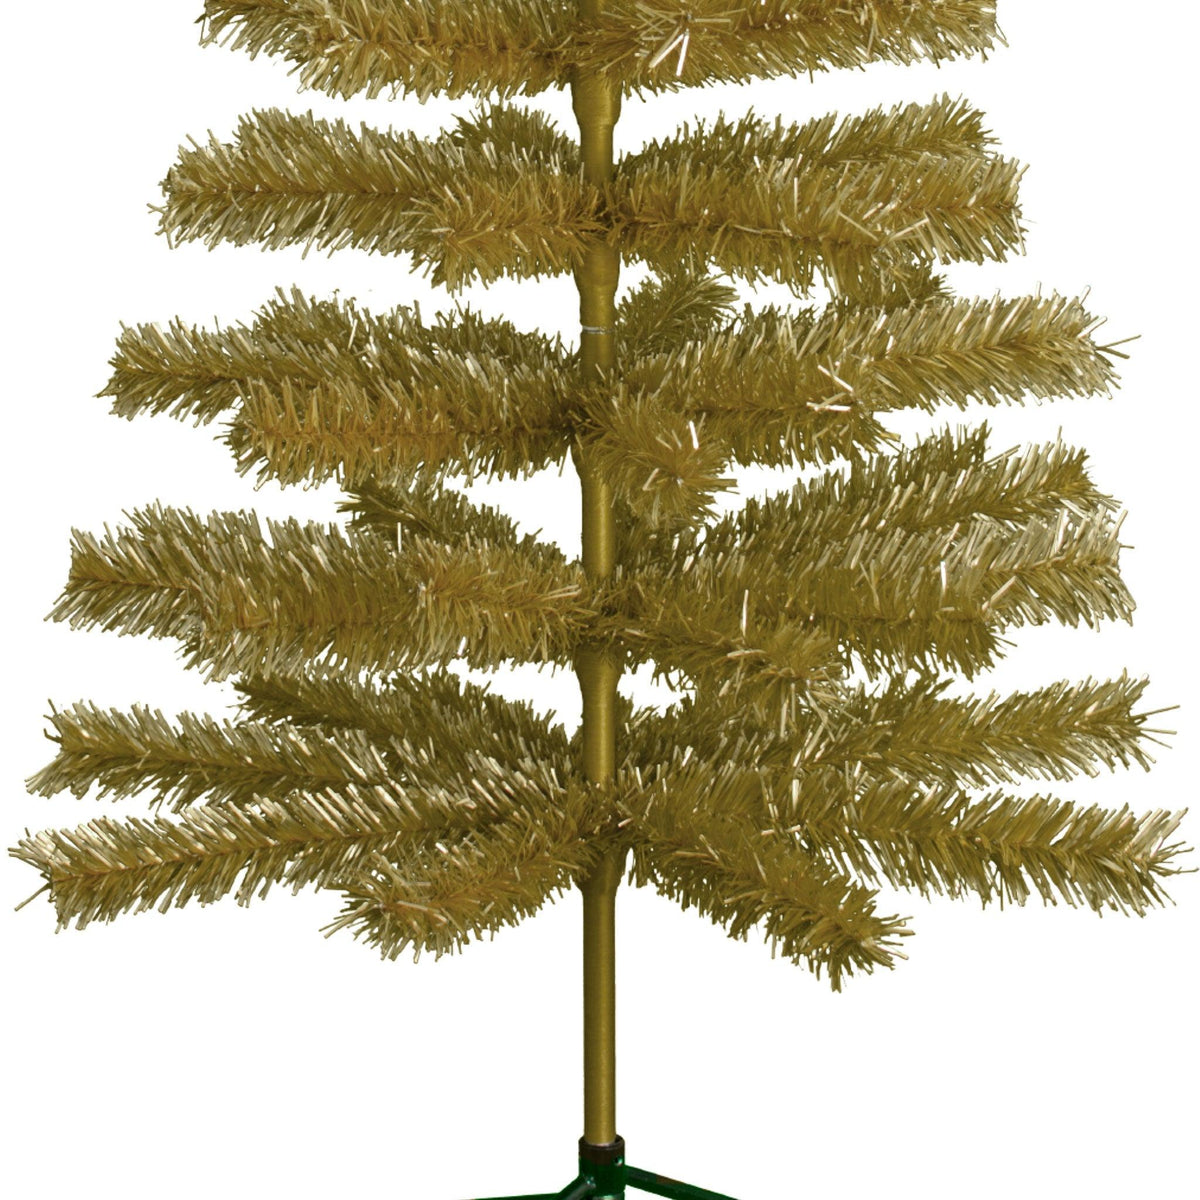 Our 60in Tall Antique Gold Christmas Tree.  Celebrate Lee Display's 120th Anniversary with our brand new Antique Gold colored tinsel Christmas Trees.  Shop for antique gold christmas trees at leedisplay.com